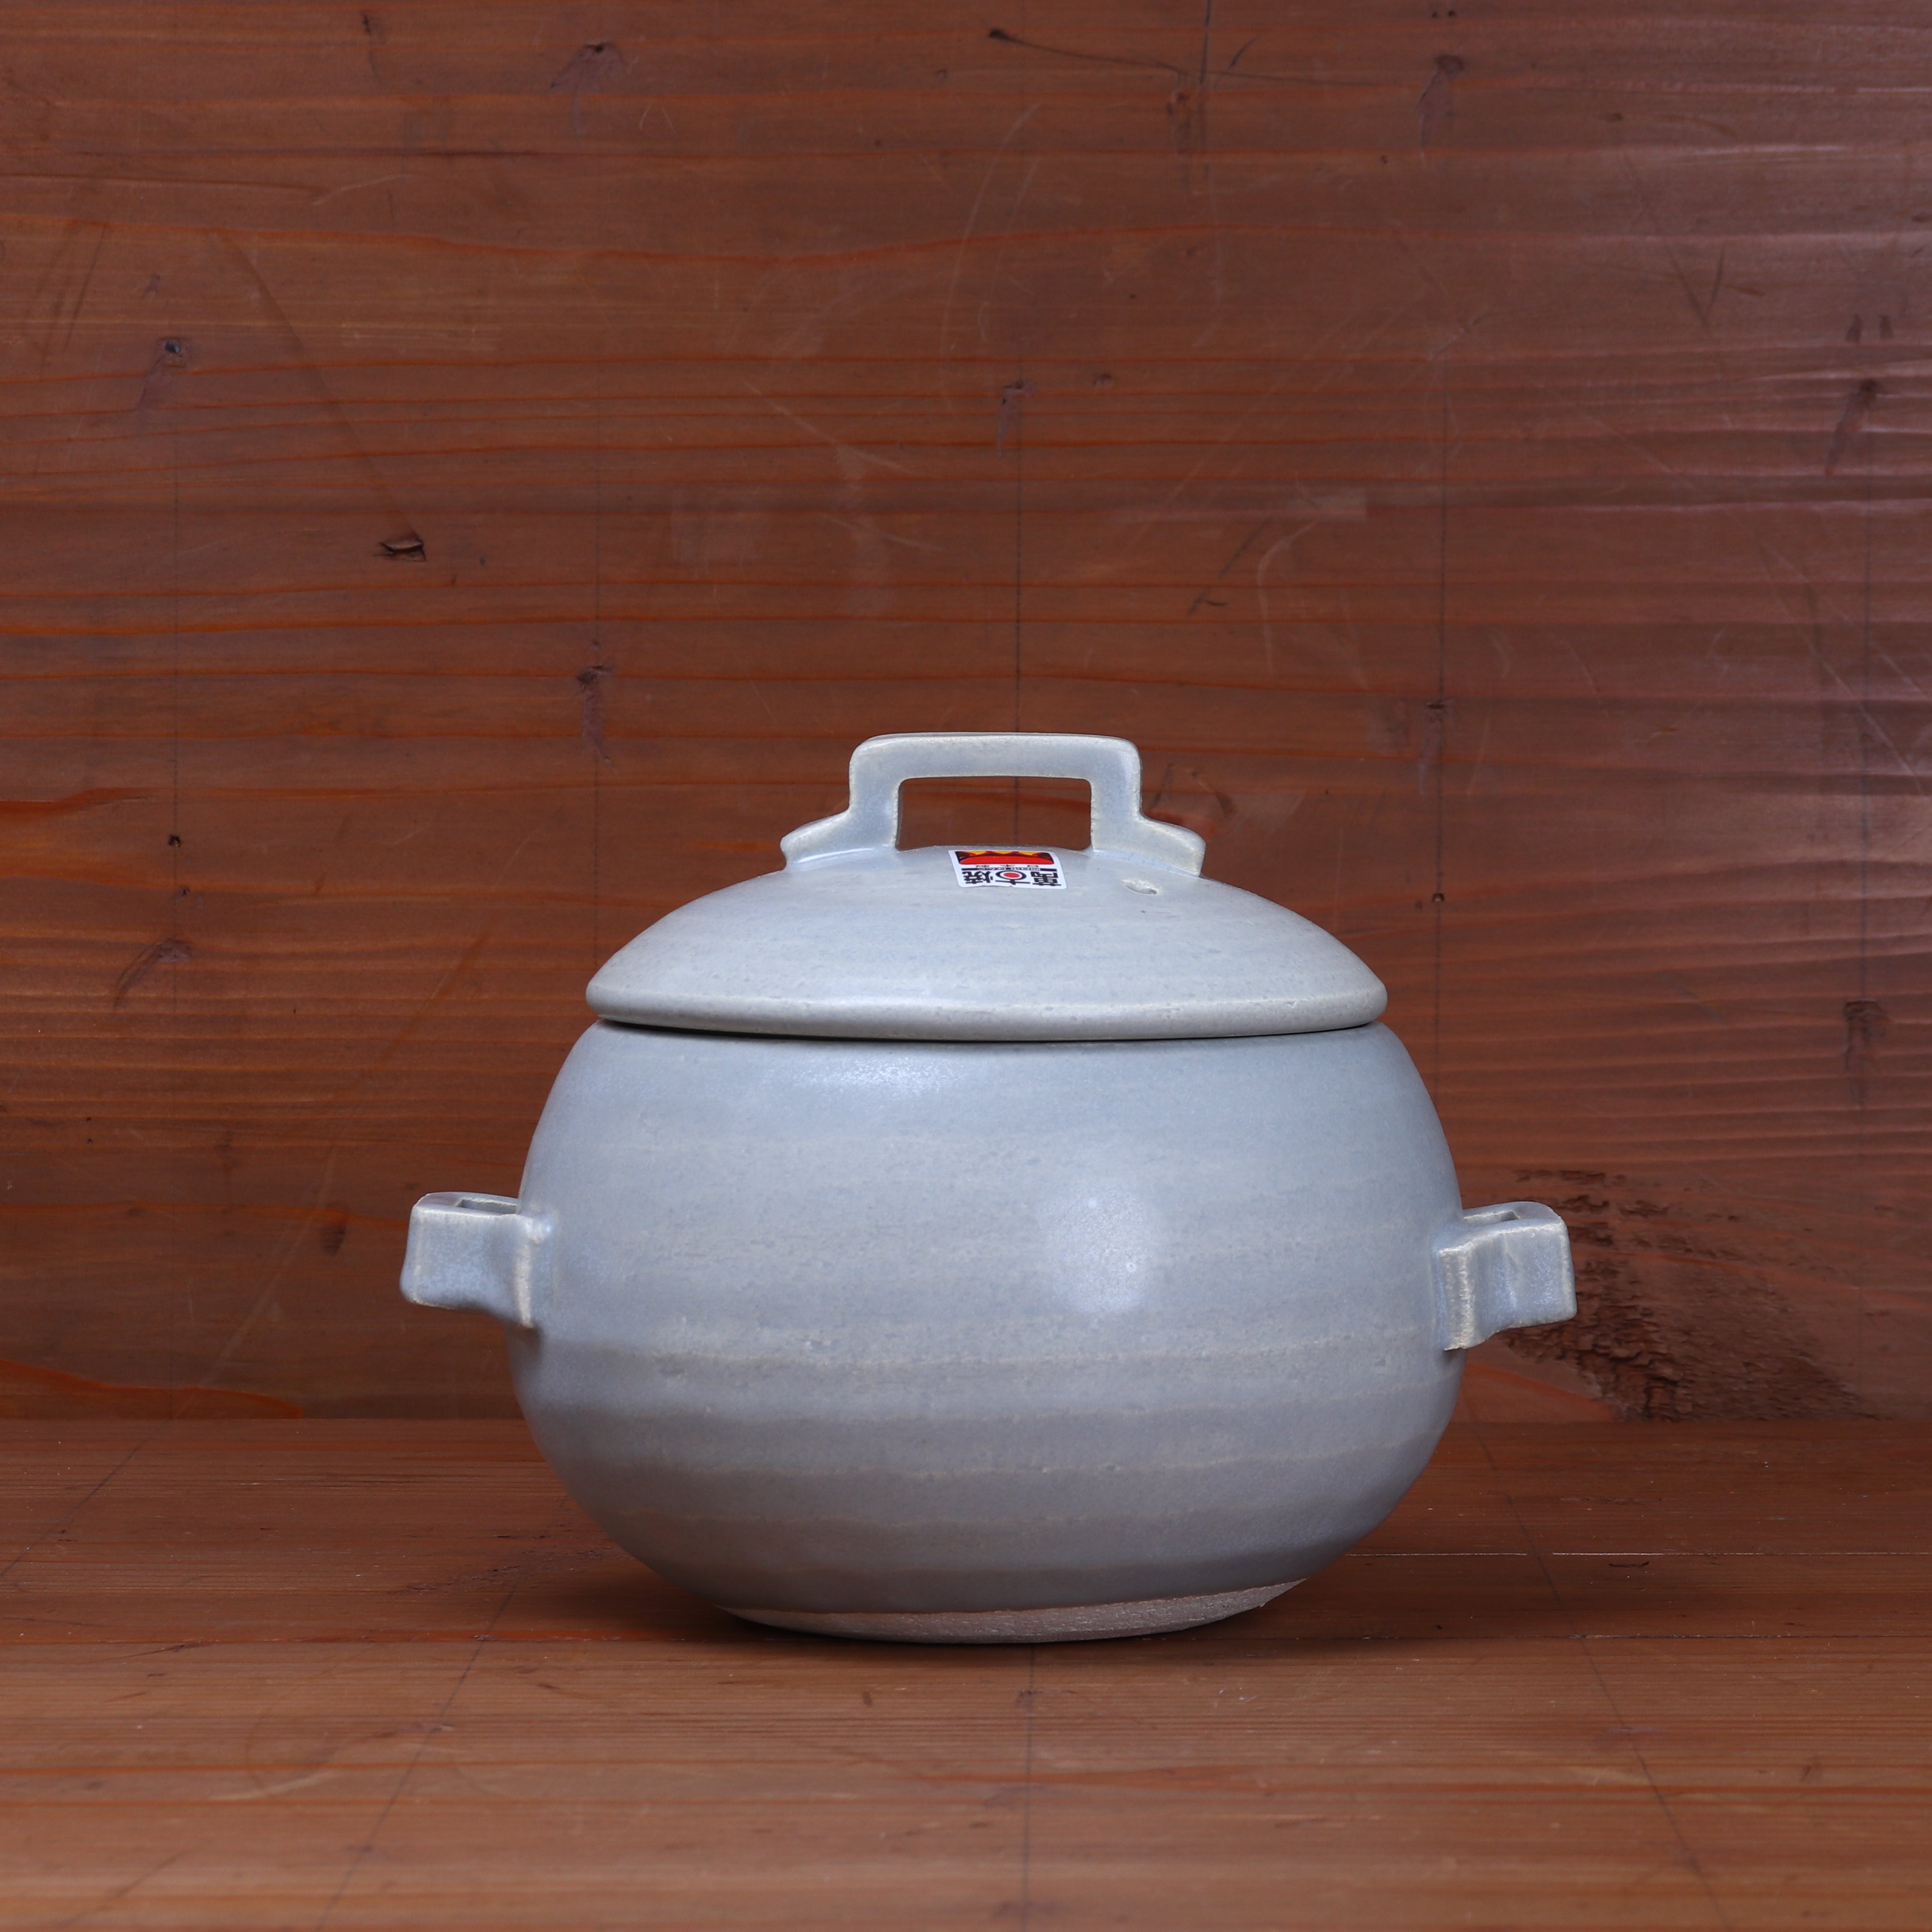 Banko Ware Earthenware Rice Cooker Donabe- Double-Lid Design for